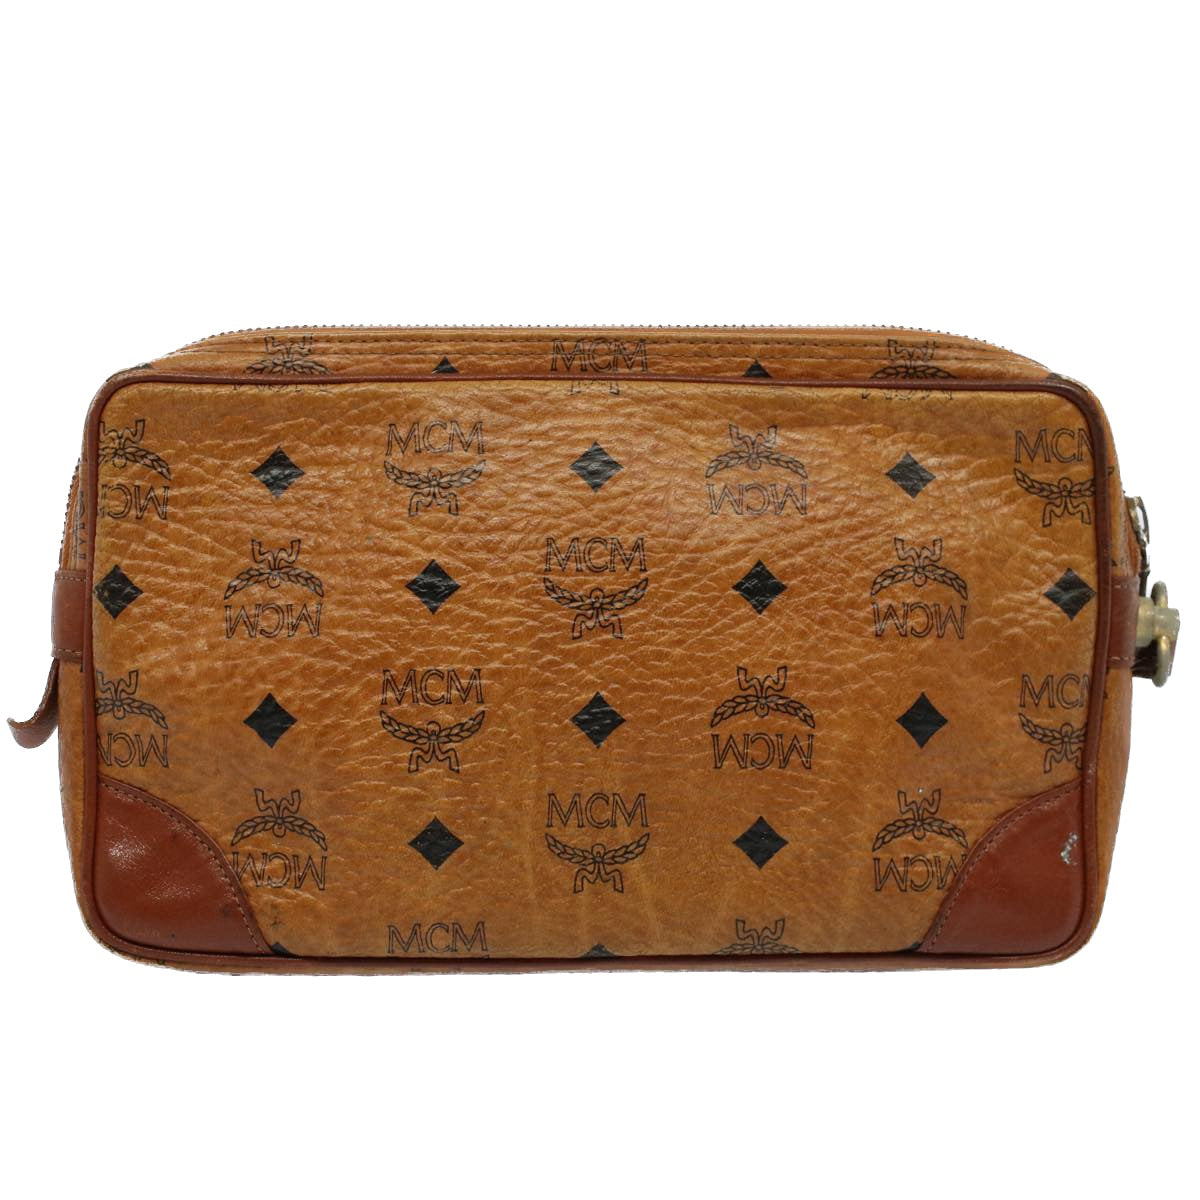 MCM Vicetos Logogram Clutch Bag PVC Leather Brown Auth bs8486 - 0